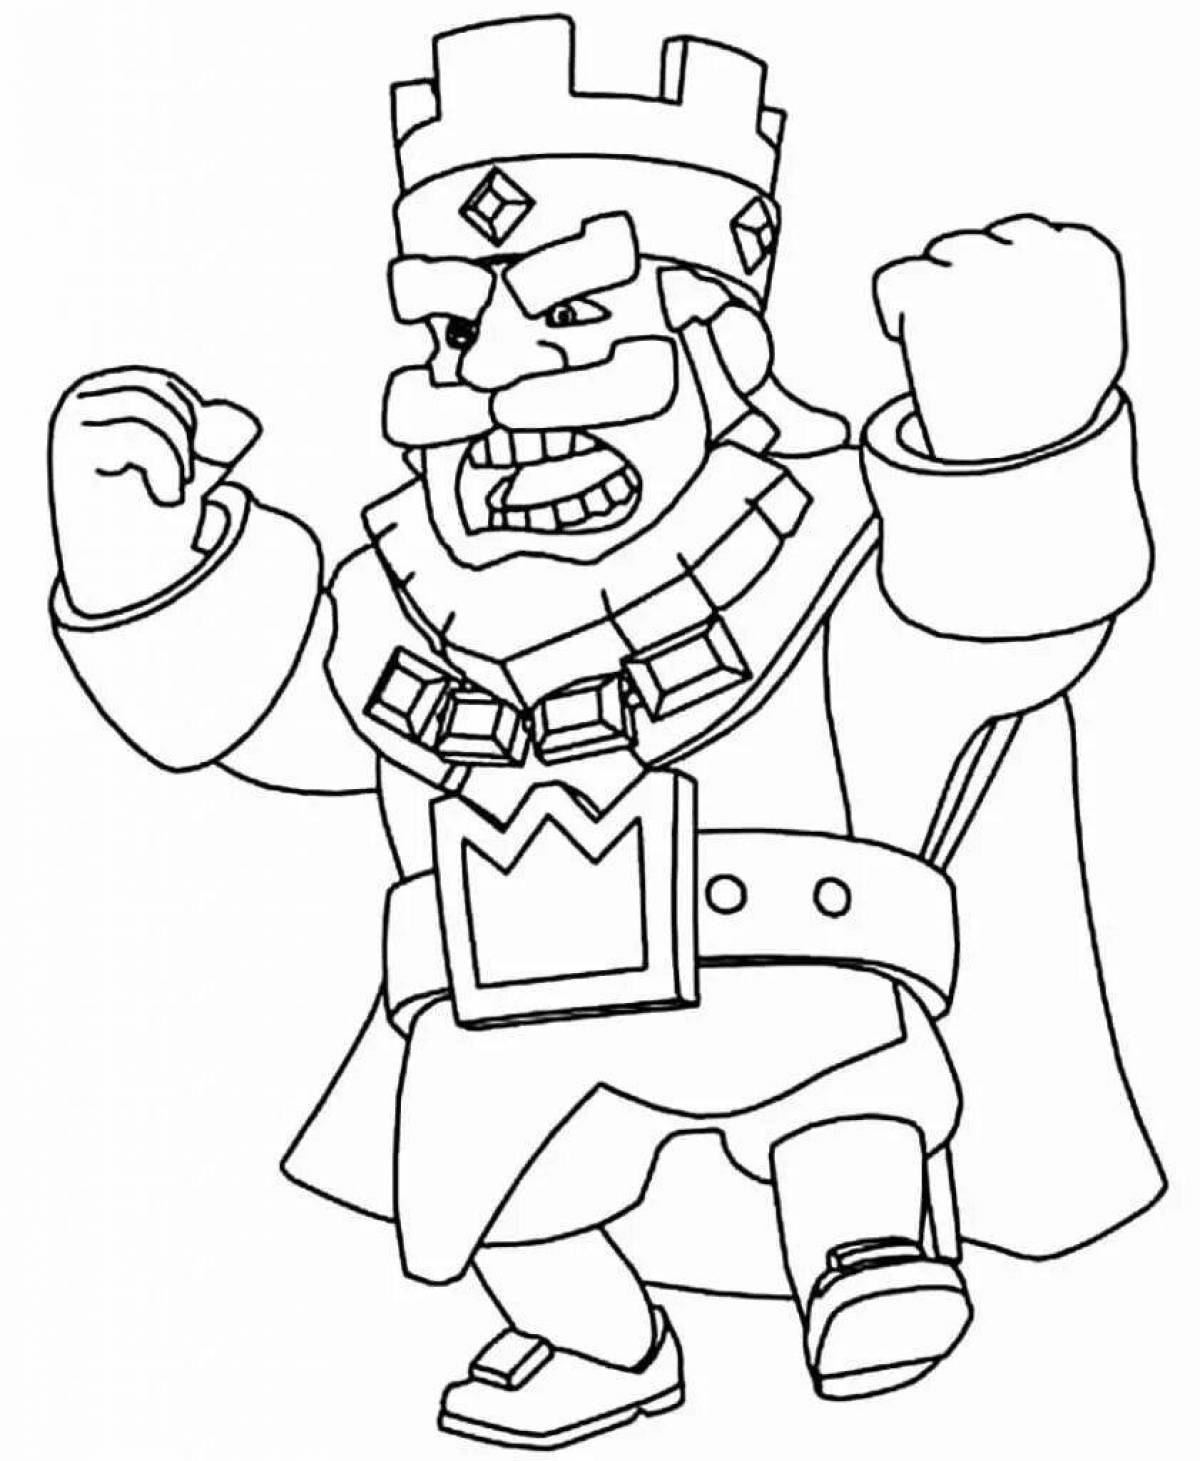 Clash of clans incredible coloring book